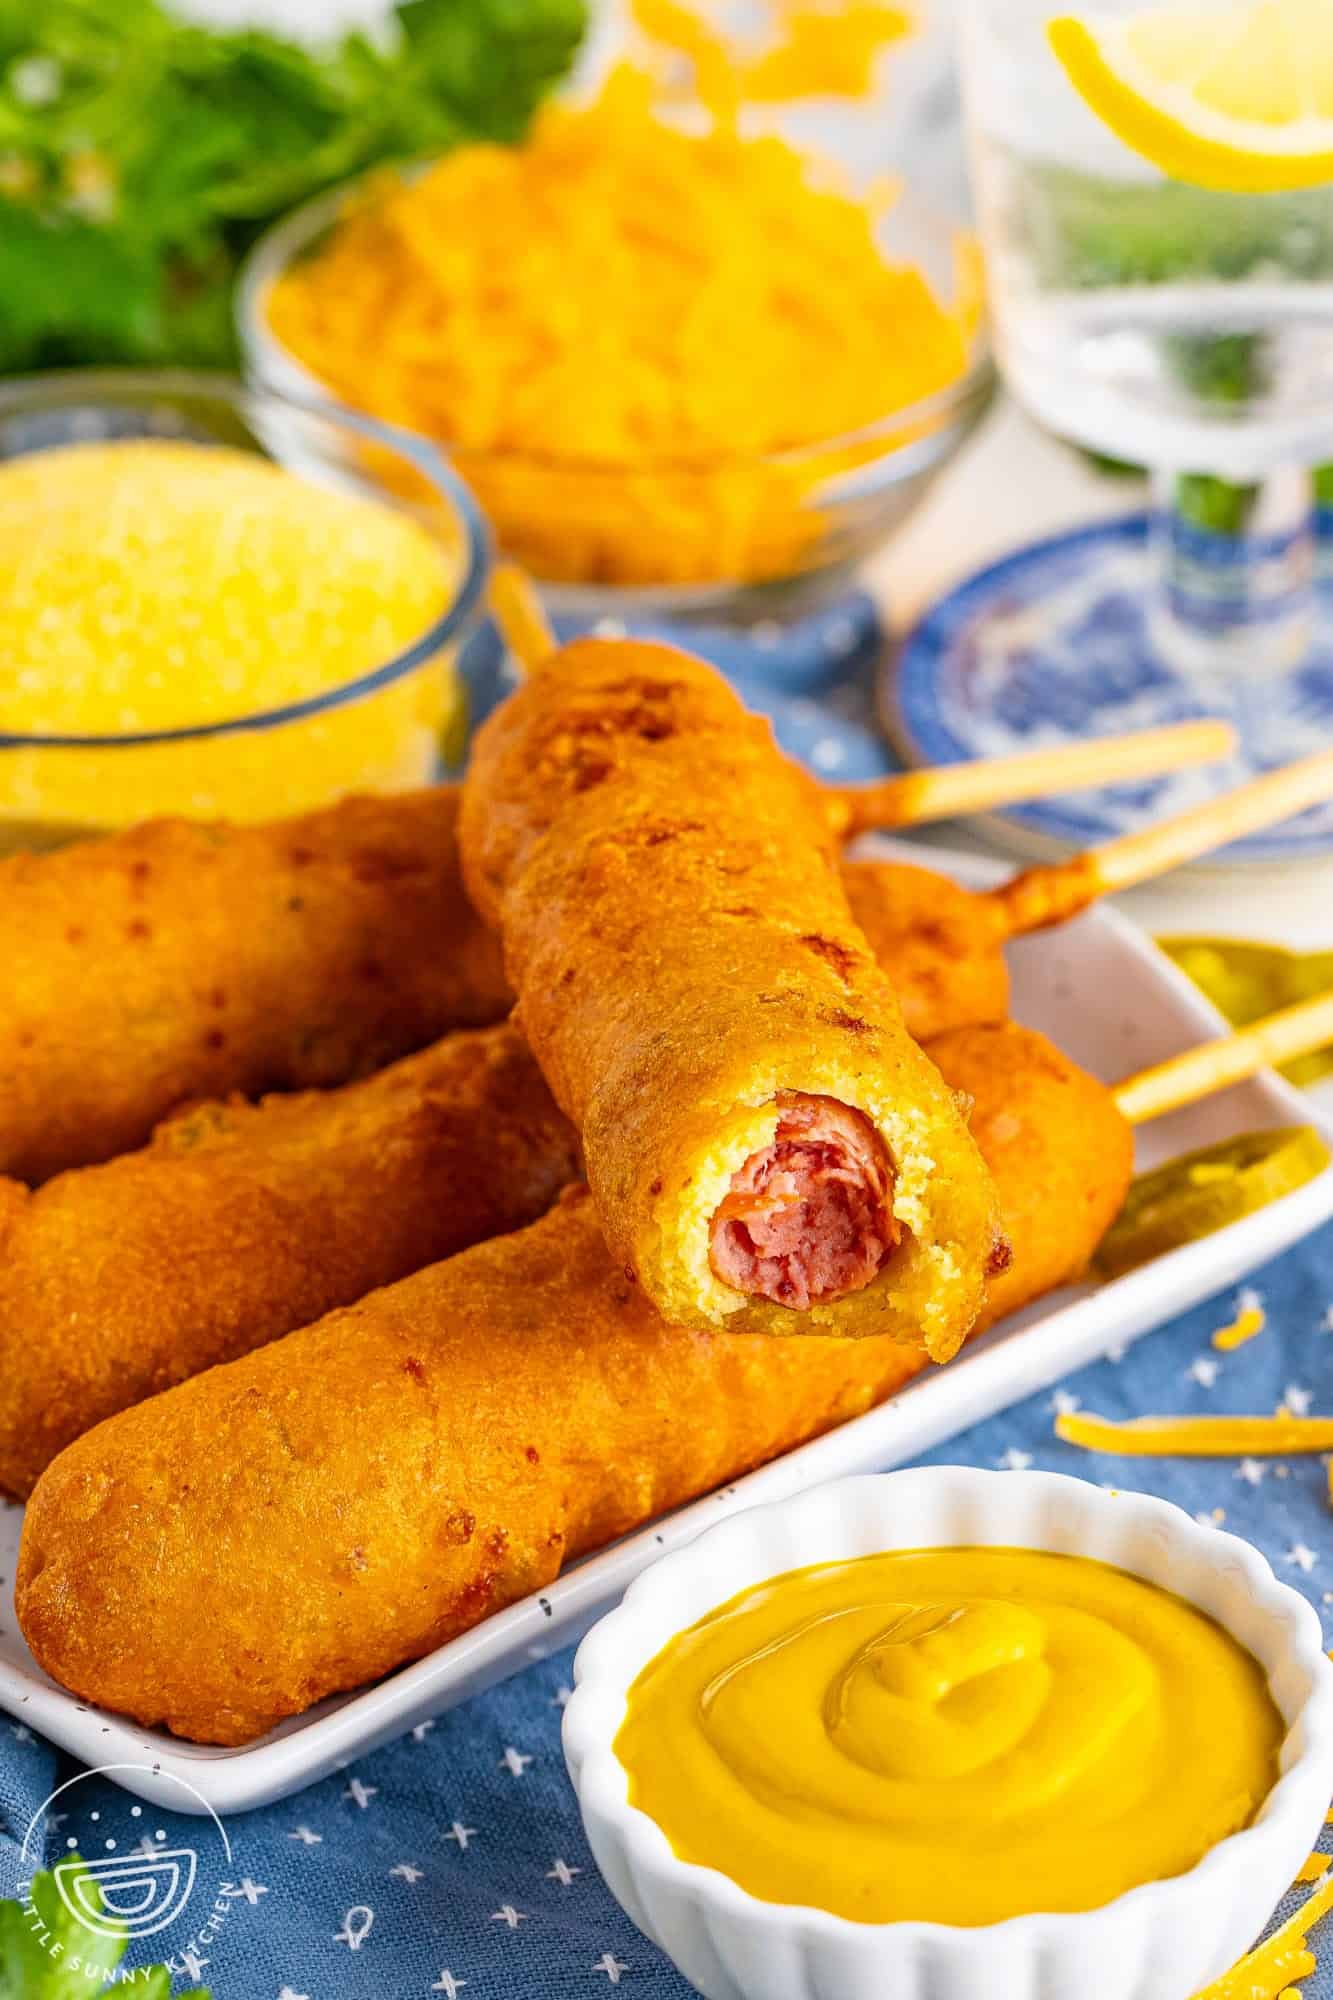 a square plate of four handmade corn dogs with cheddar cheese and jalapenos in the batter. In front of the plate is a small dish of mustard. 